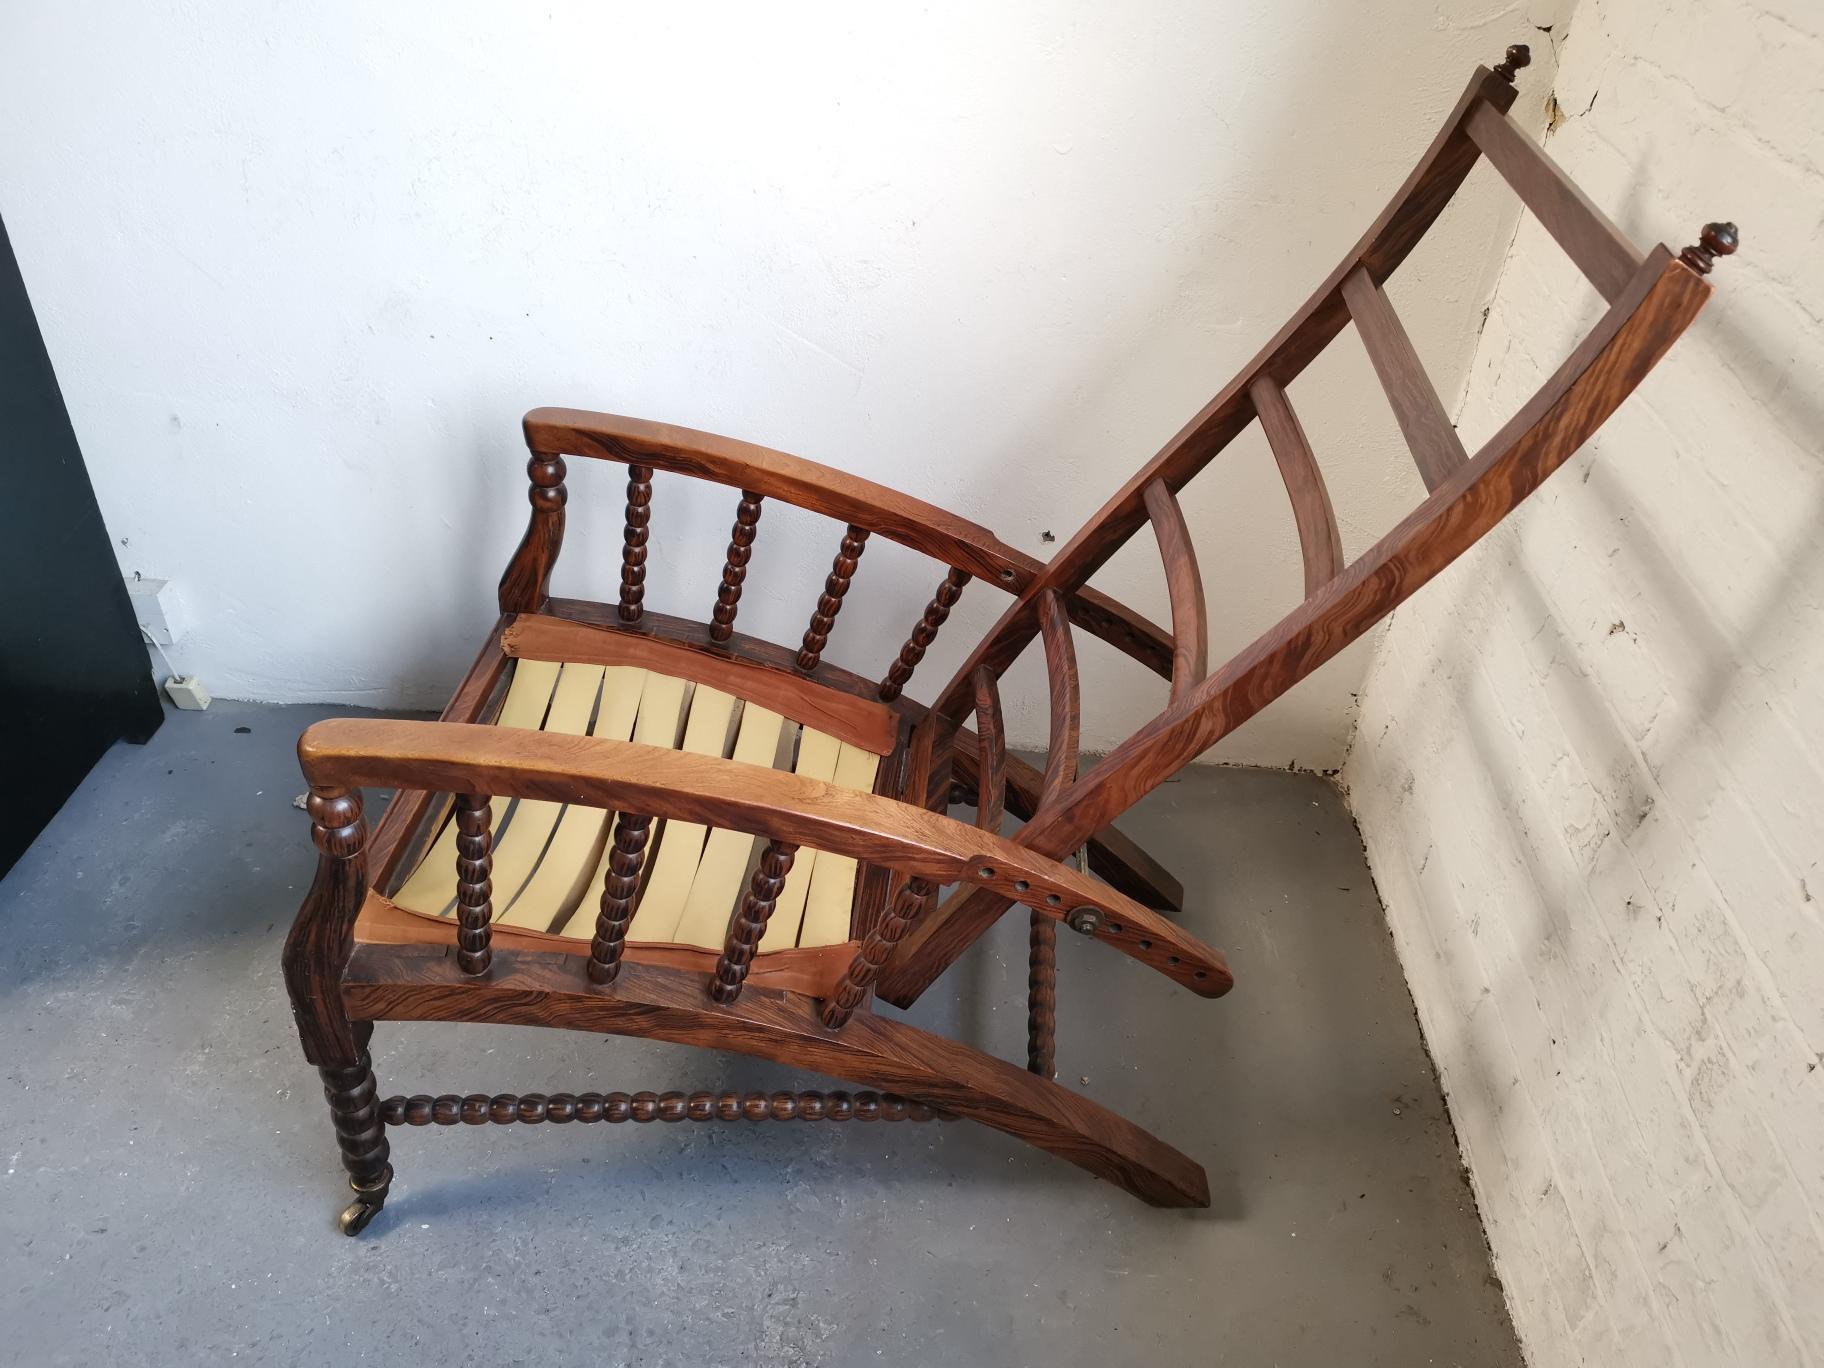 Morris & Co. attributed, after a design by Phillip Webb.
An aesthetic movement adjustable reclining armchair with original painted simulated rosewood effect.
Ready for the upholstery of your choice. We can provide an upholstery service if